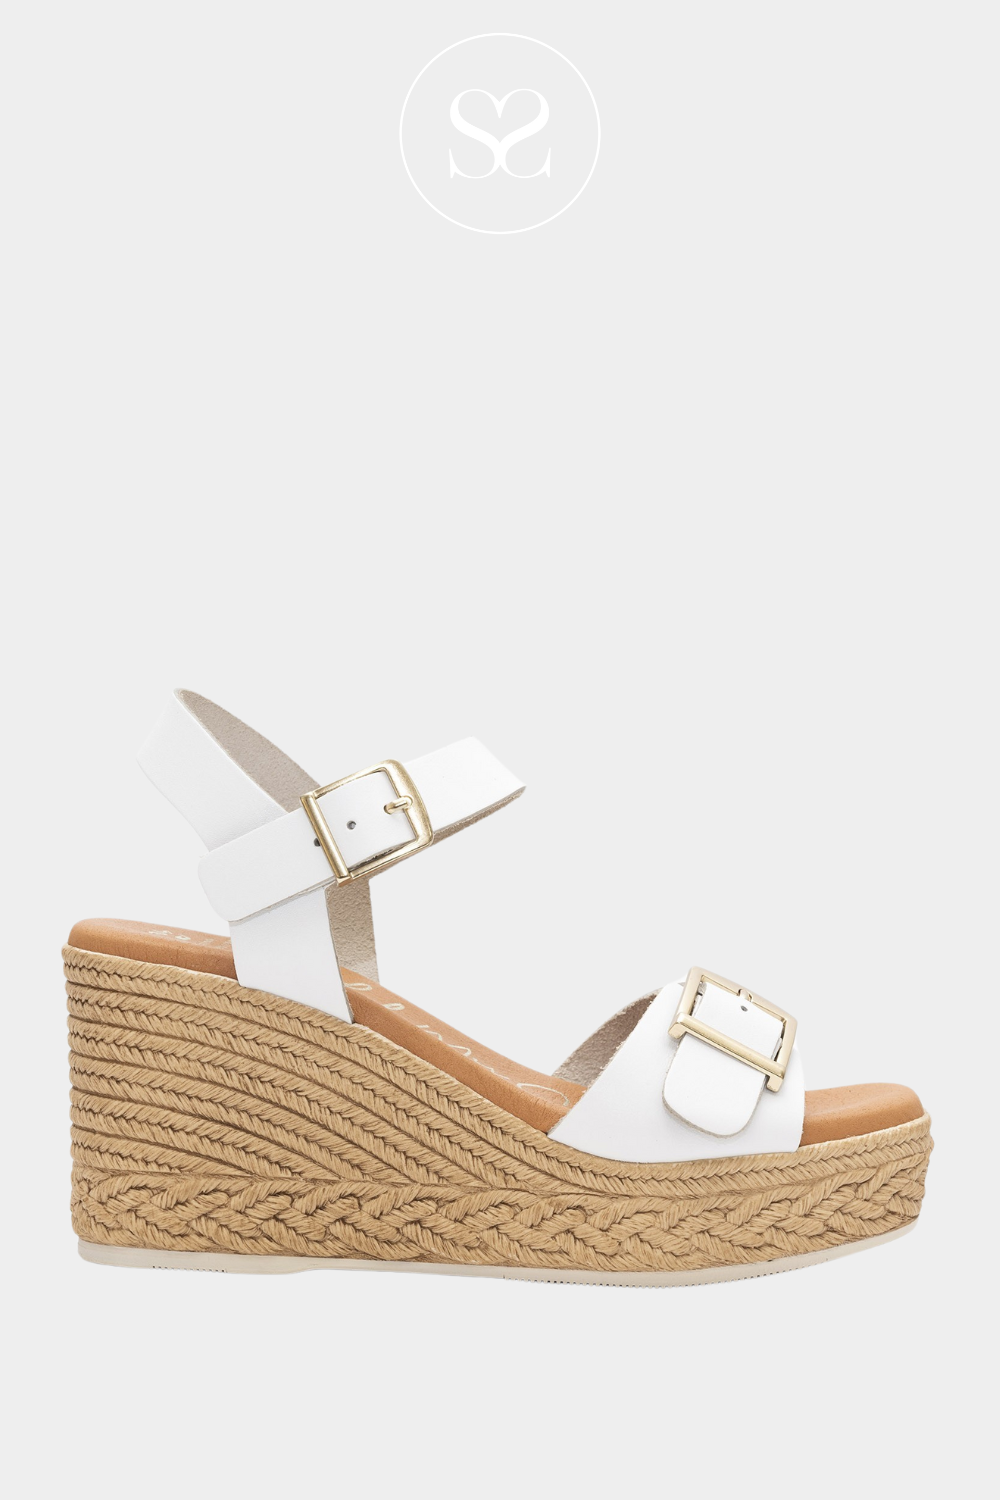 OH MY SANDALS 5459 WHITE WEDGE PLATFORM WITH ADJUSTABLE ANKLE STRAP AND STRAP ACROSS THE FOOT. ESPADRILLE SOLE